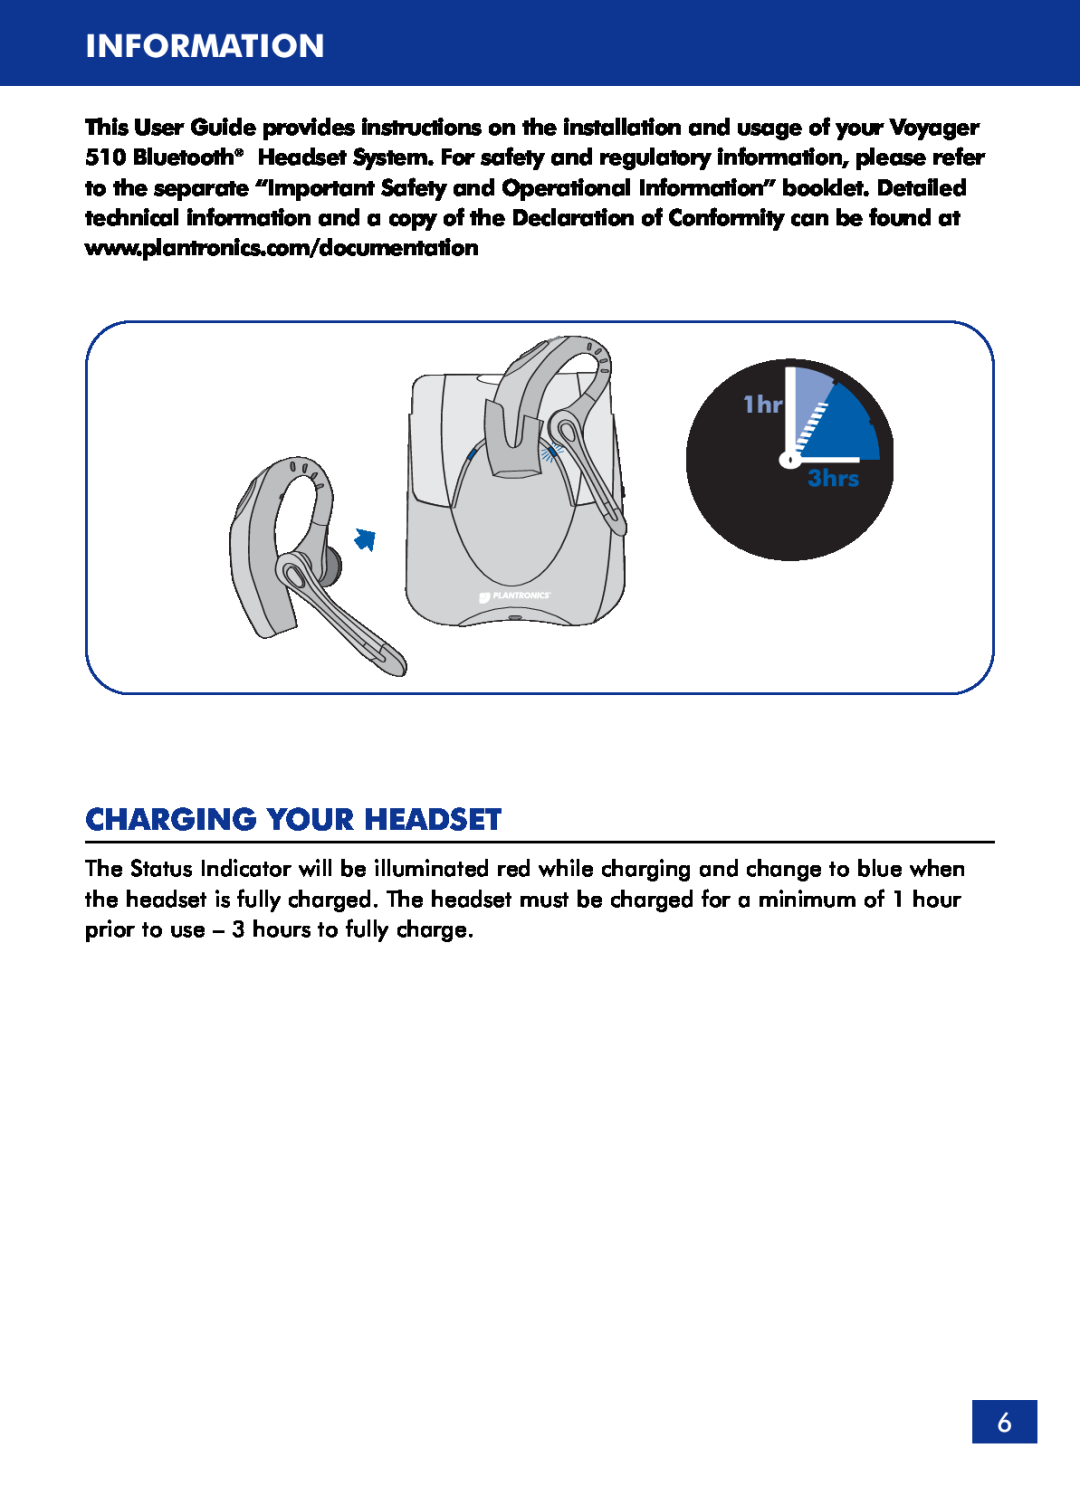 Plantronics 510 manual Information, Charging Your Headset 